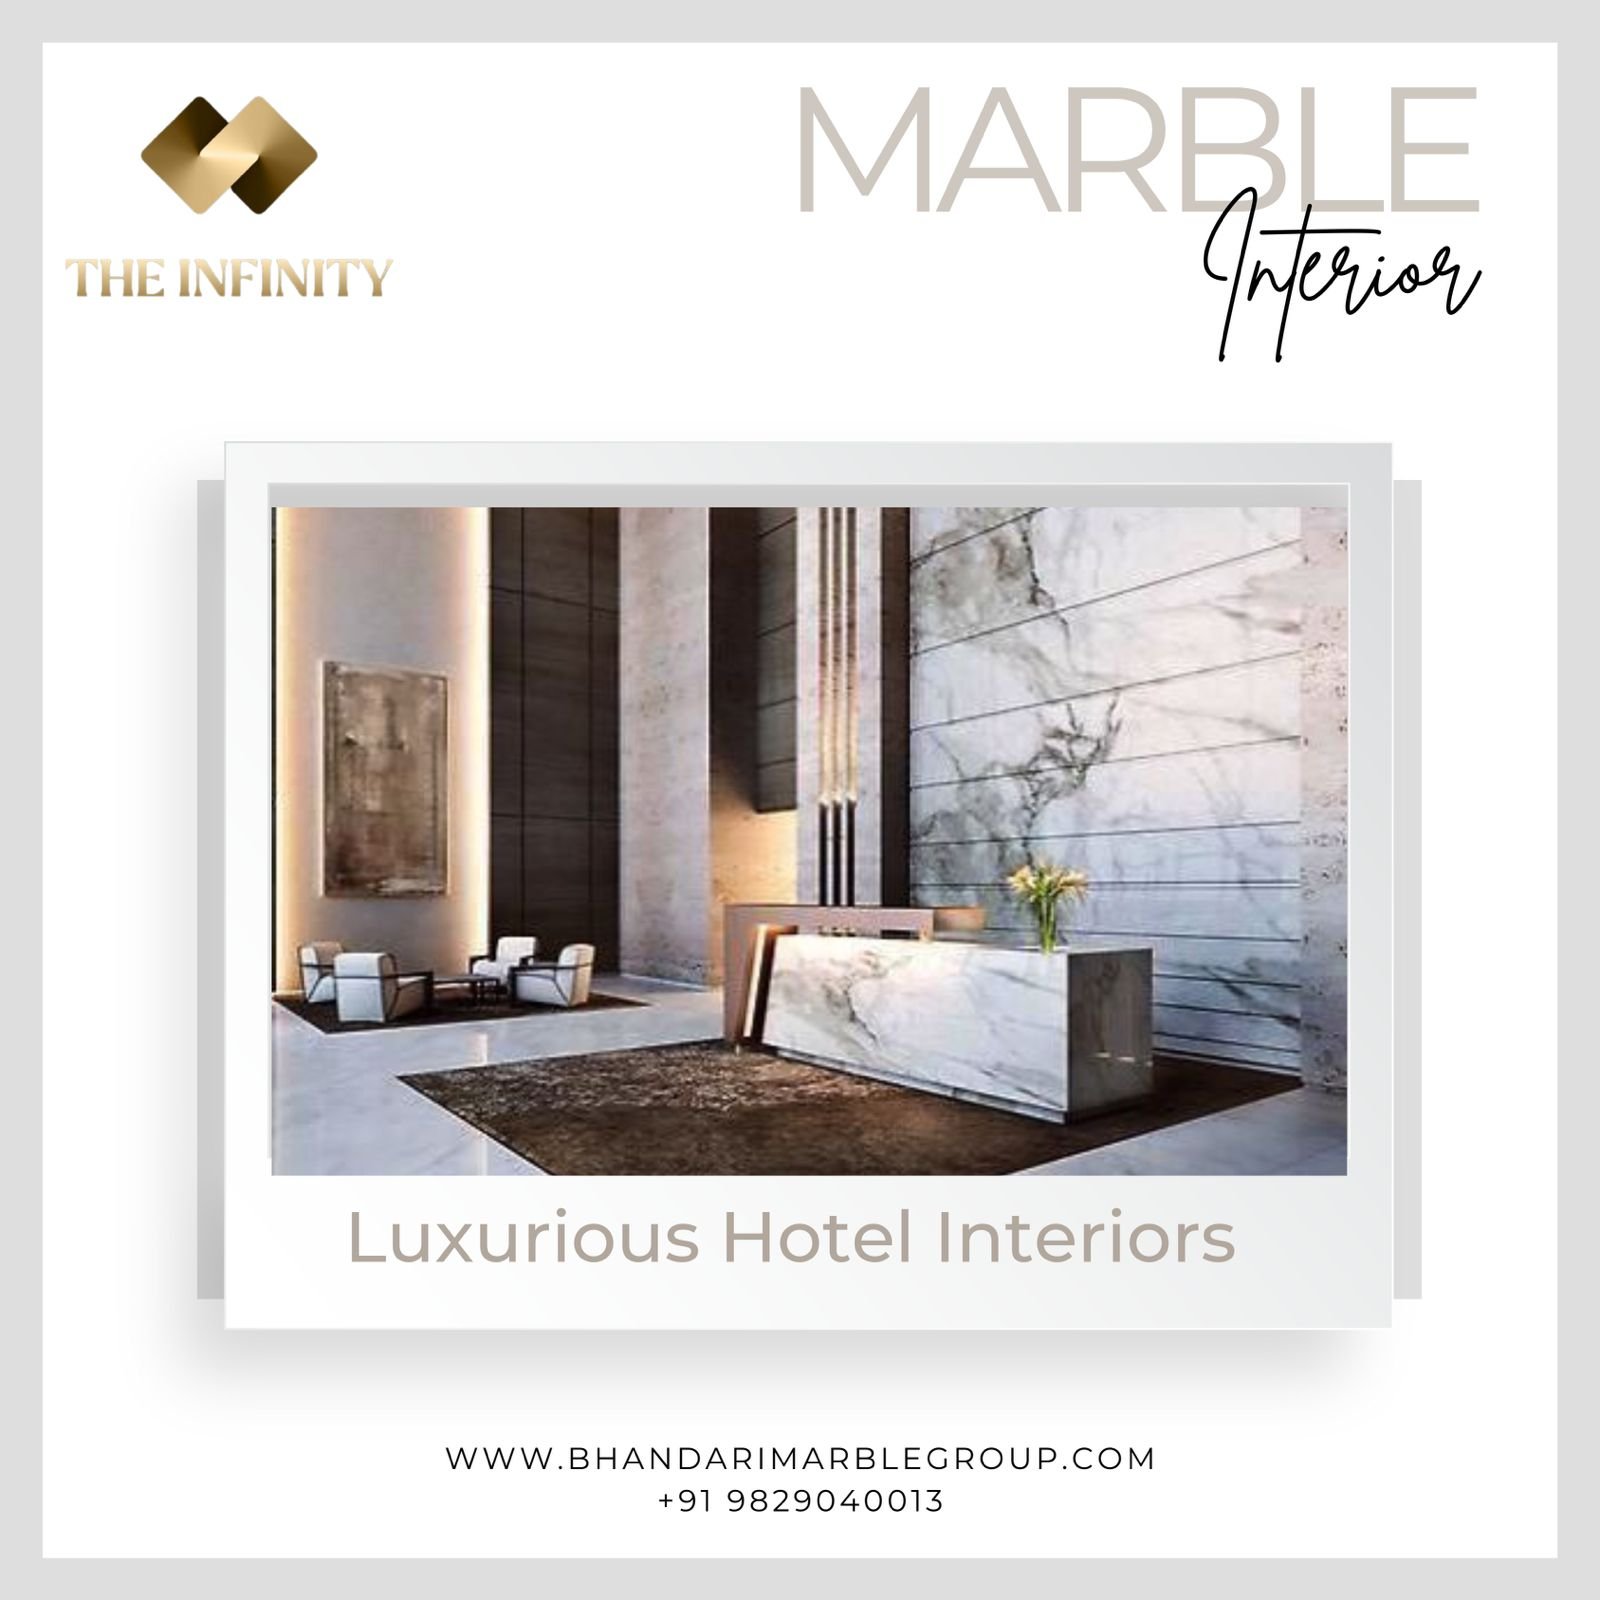 WHICH IS MORE POPULAR IN HIGH-END BOUTIQUE HOTELS AND RESIDENCES? MARBLE STATUARIO OR CARRARA OR CALACATTA